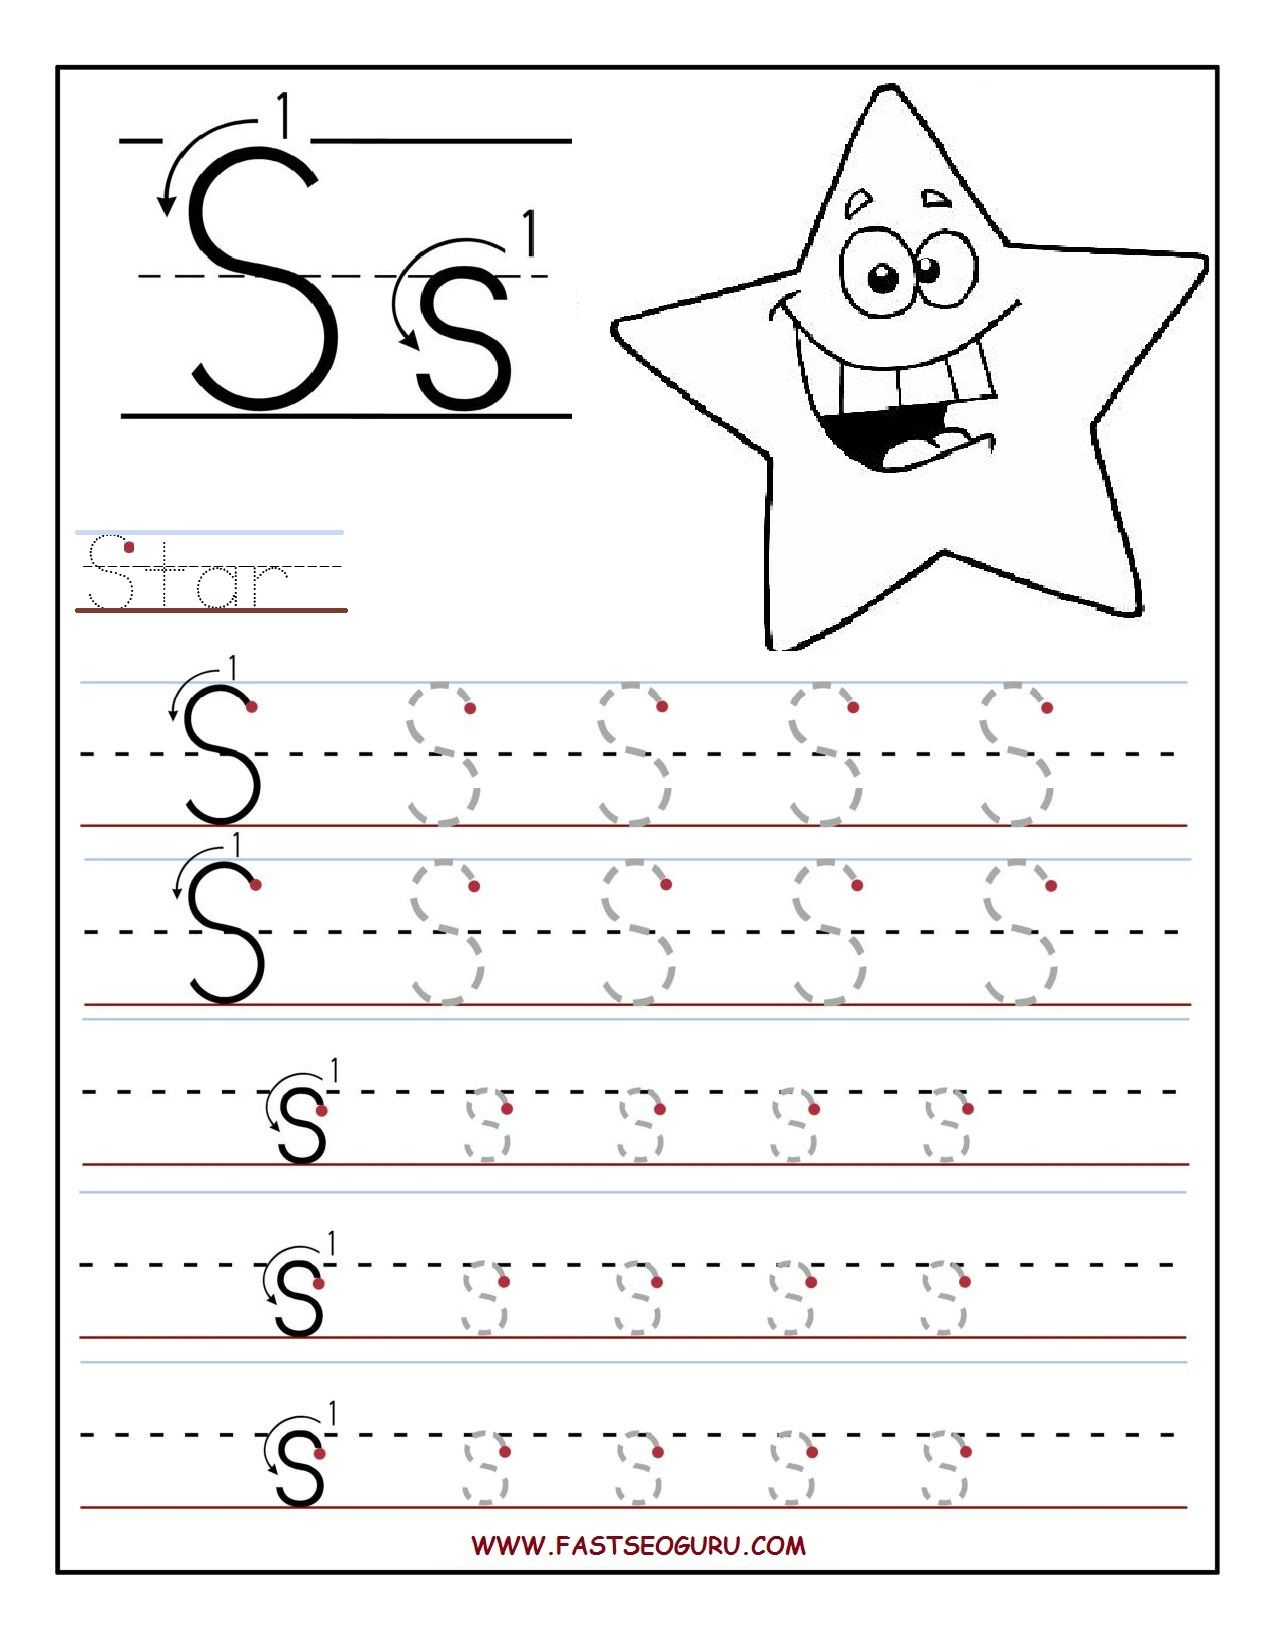 Printable Cursive Alphabet Worksheets Abitlikethis pertaining to Letter Tracing Worksheets Toddlers